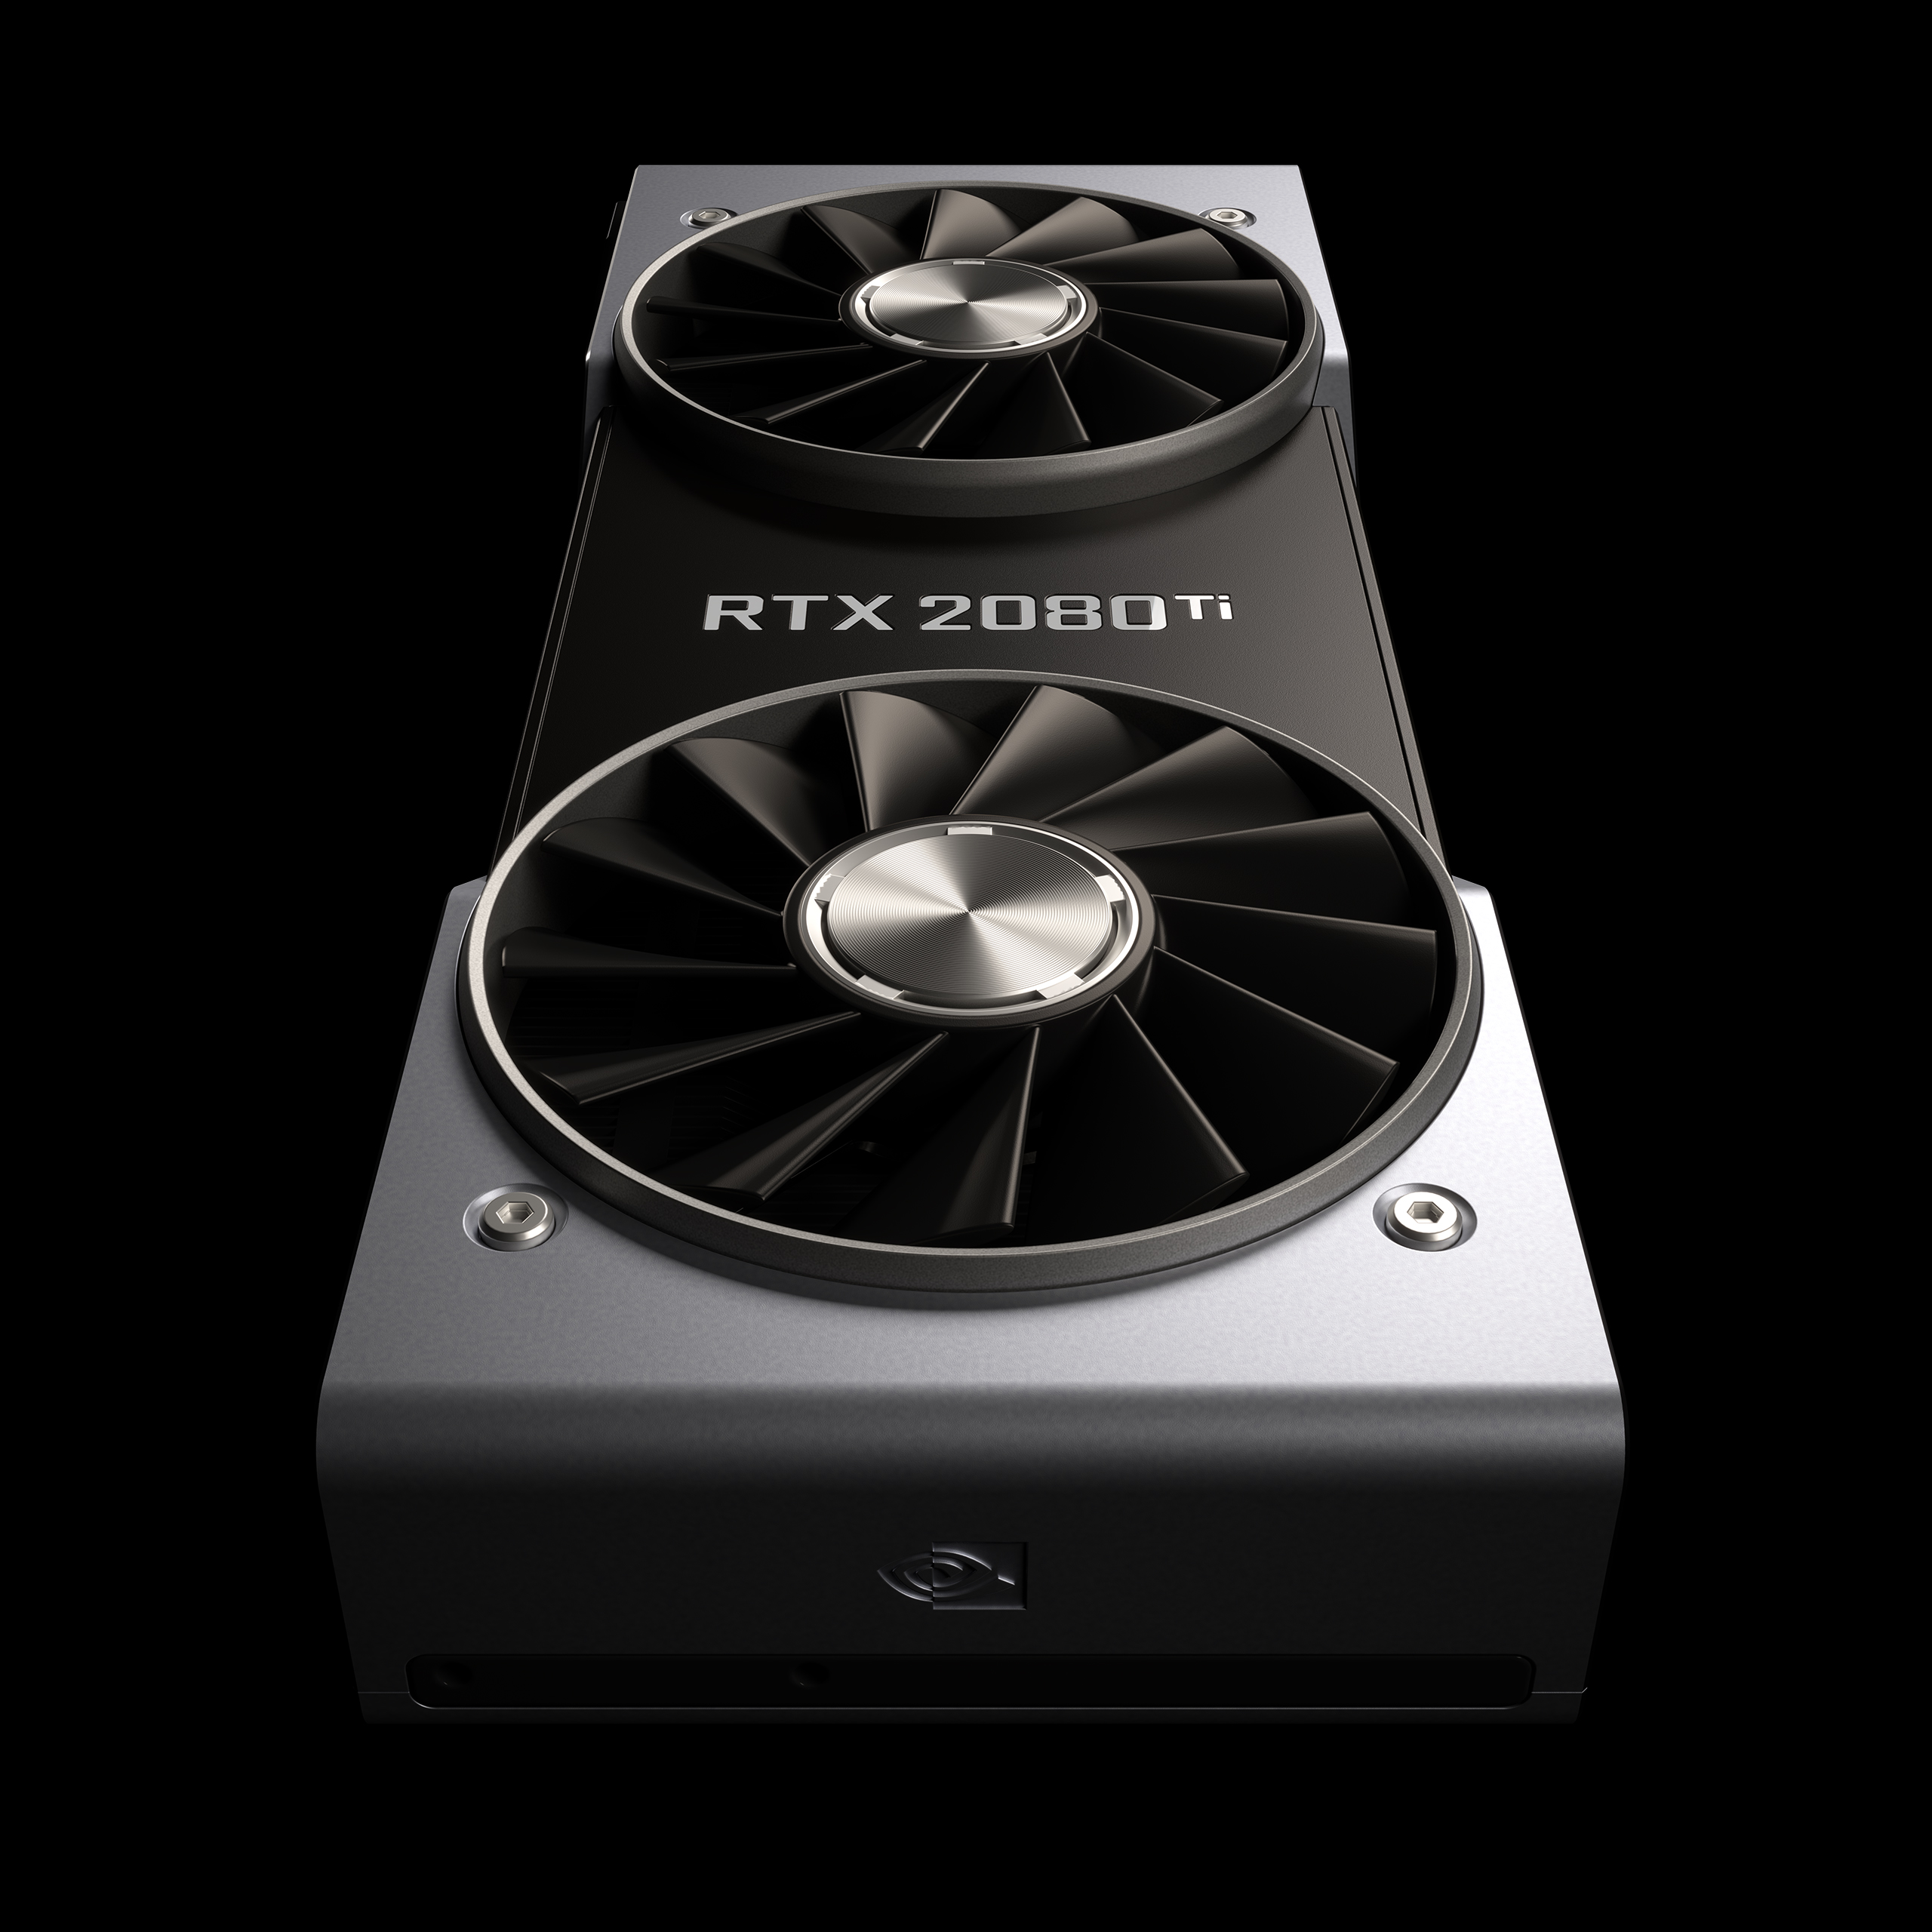 Nvidia GeForce RTX 2080 Ti Founders Edition Specs and Prices – GND